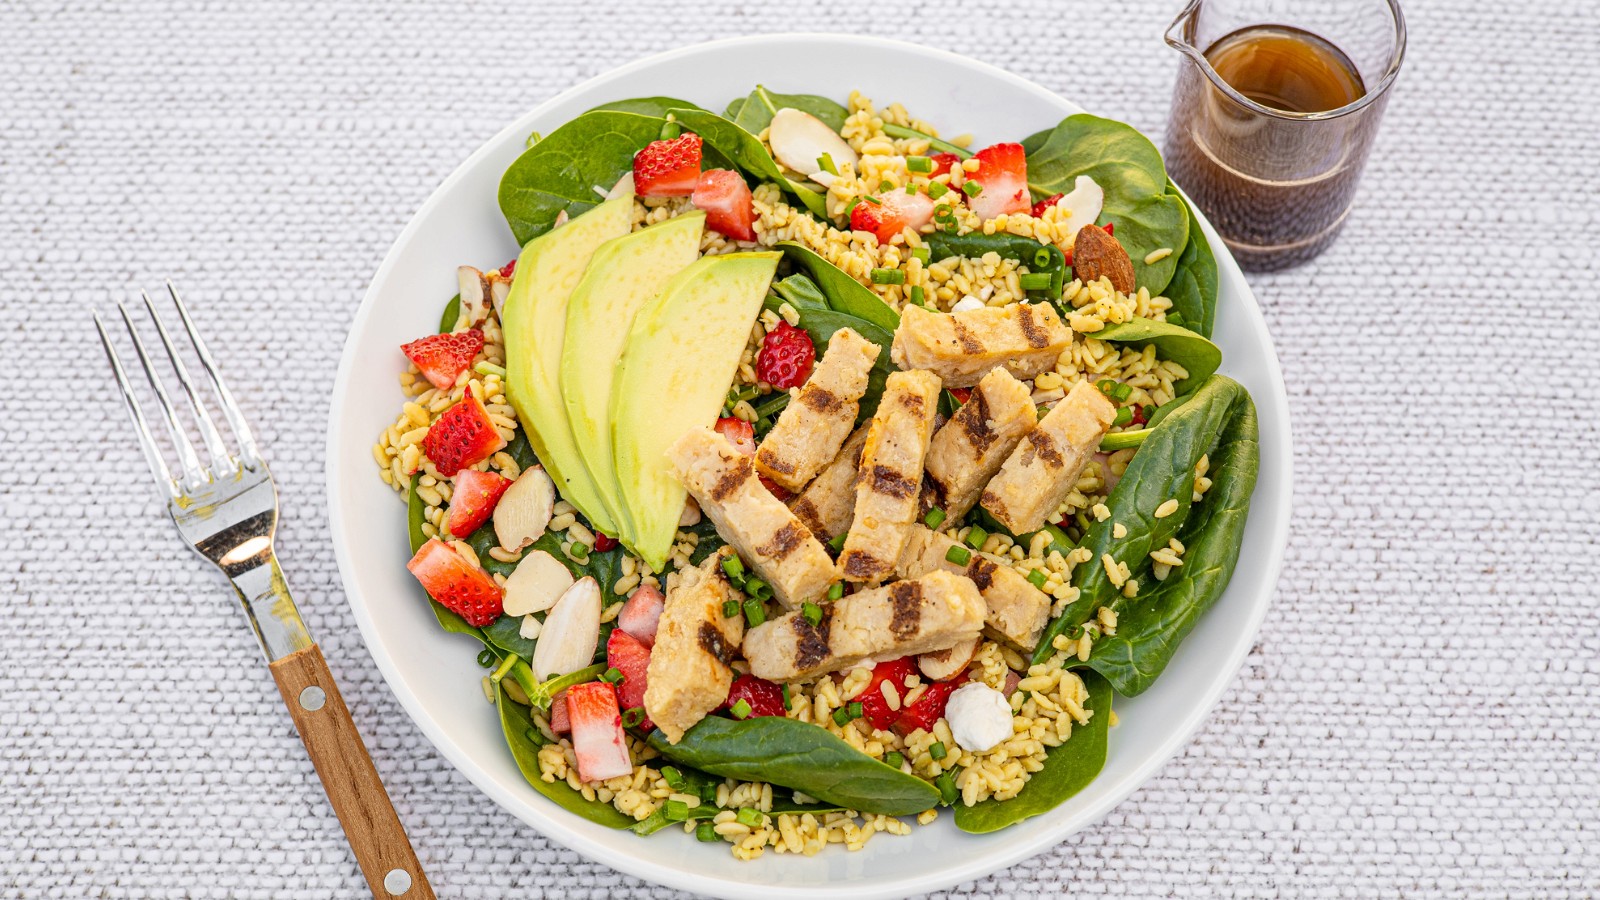 Image of Strawberry and Spinach “Chik'n” Salad